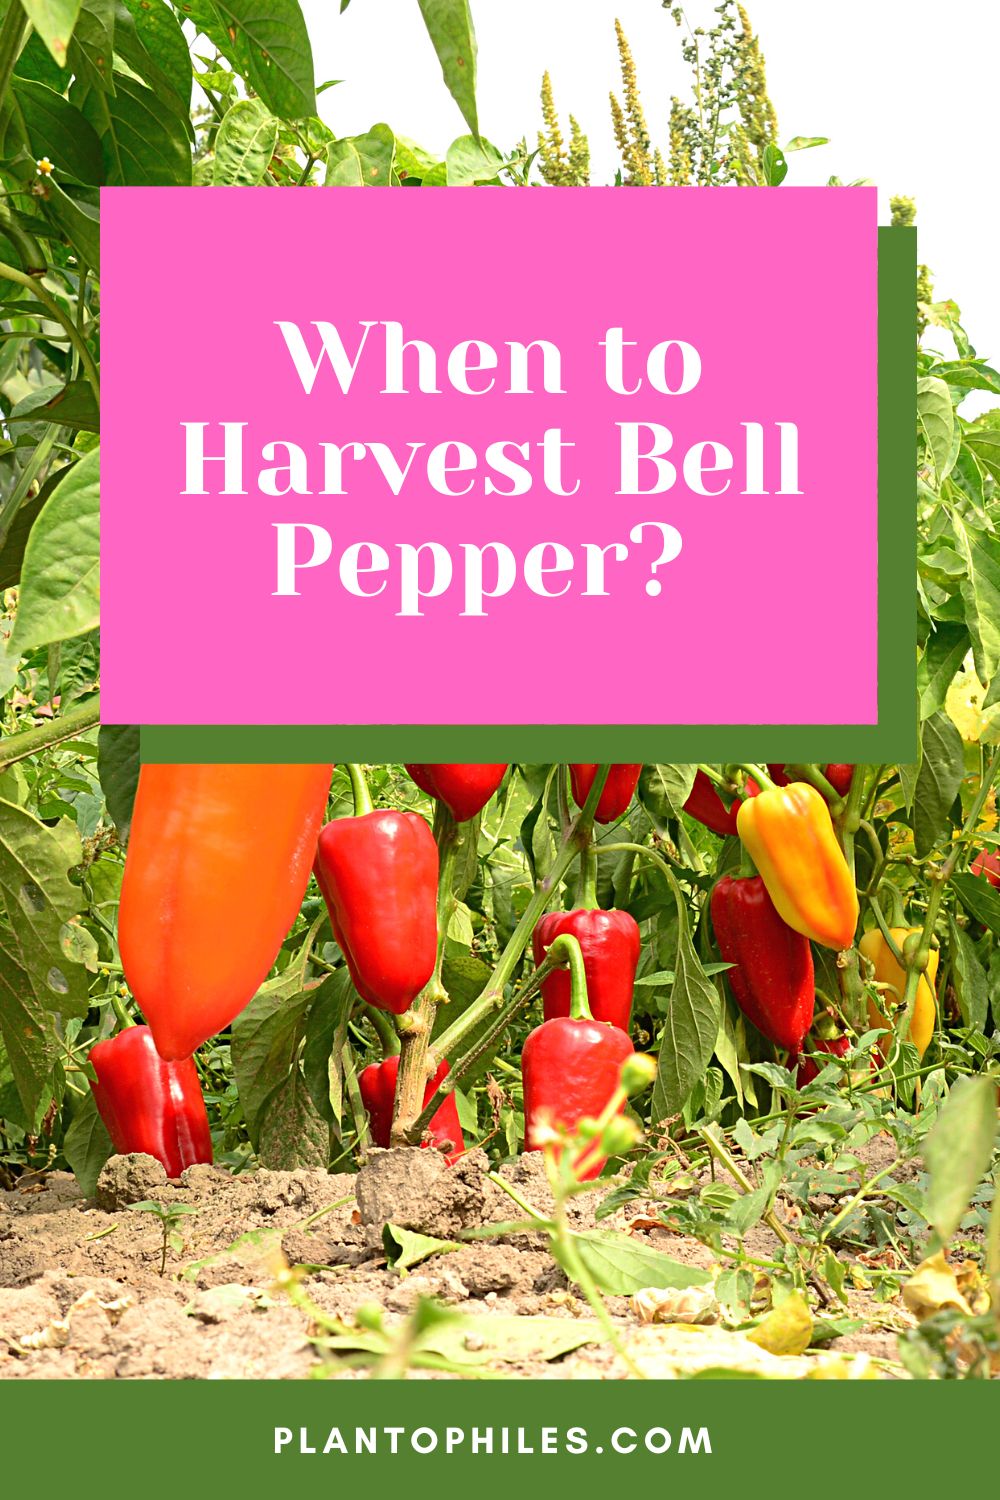 When to Harvest Bell Pepper?